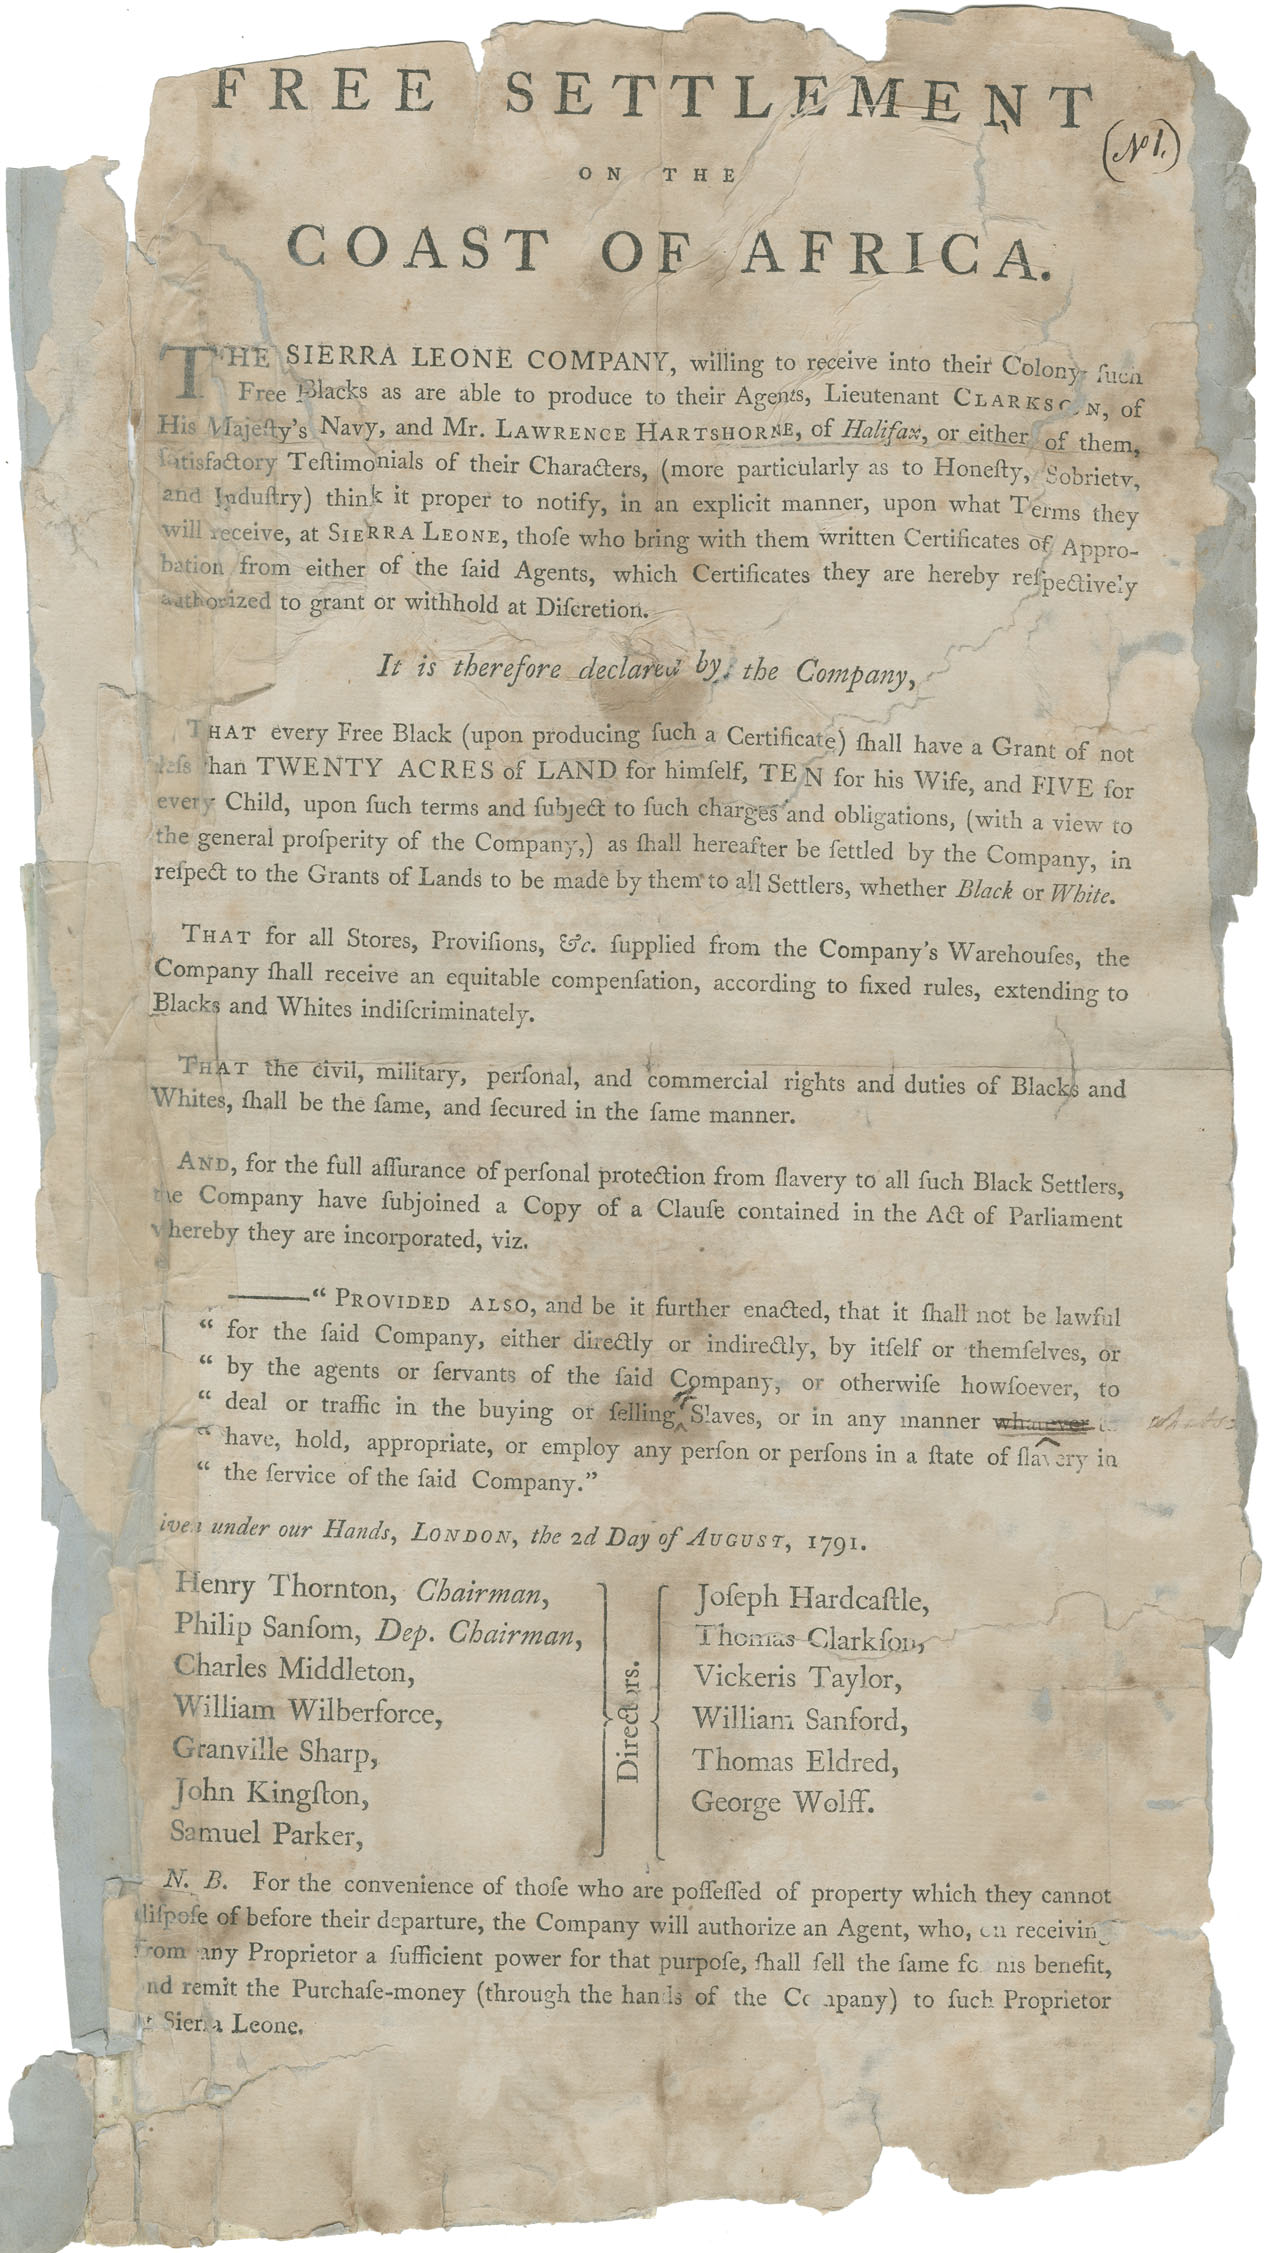 Declaration of the Sierra Leone Company of their readiness to receive into their Colony certain Free Blacks